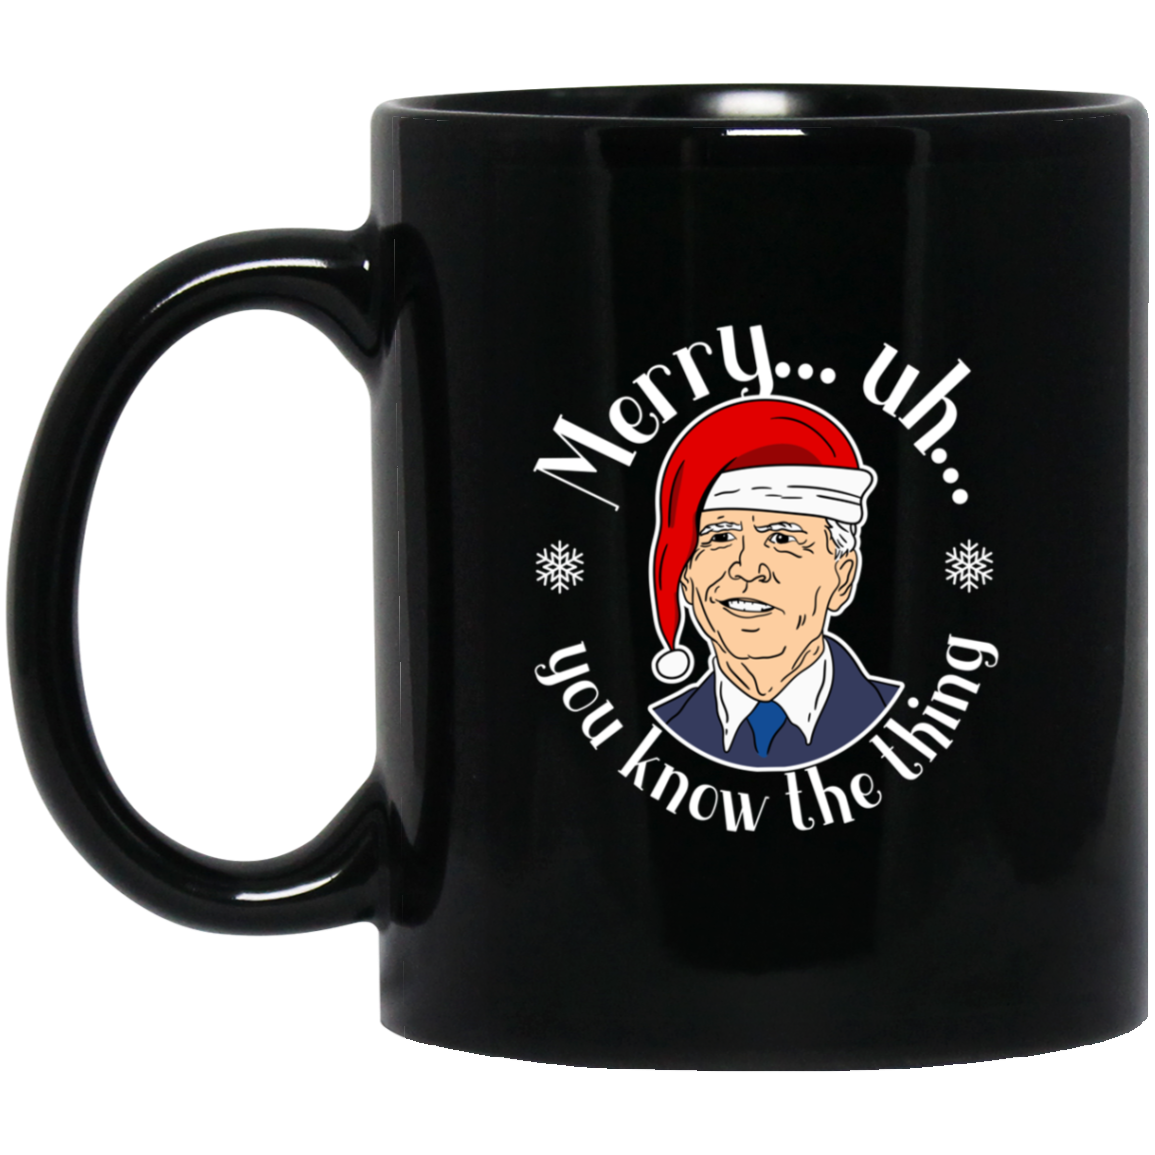 Merry Uh - You Know The Thing - MUGS